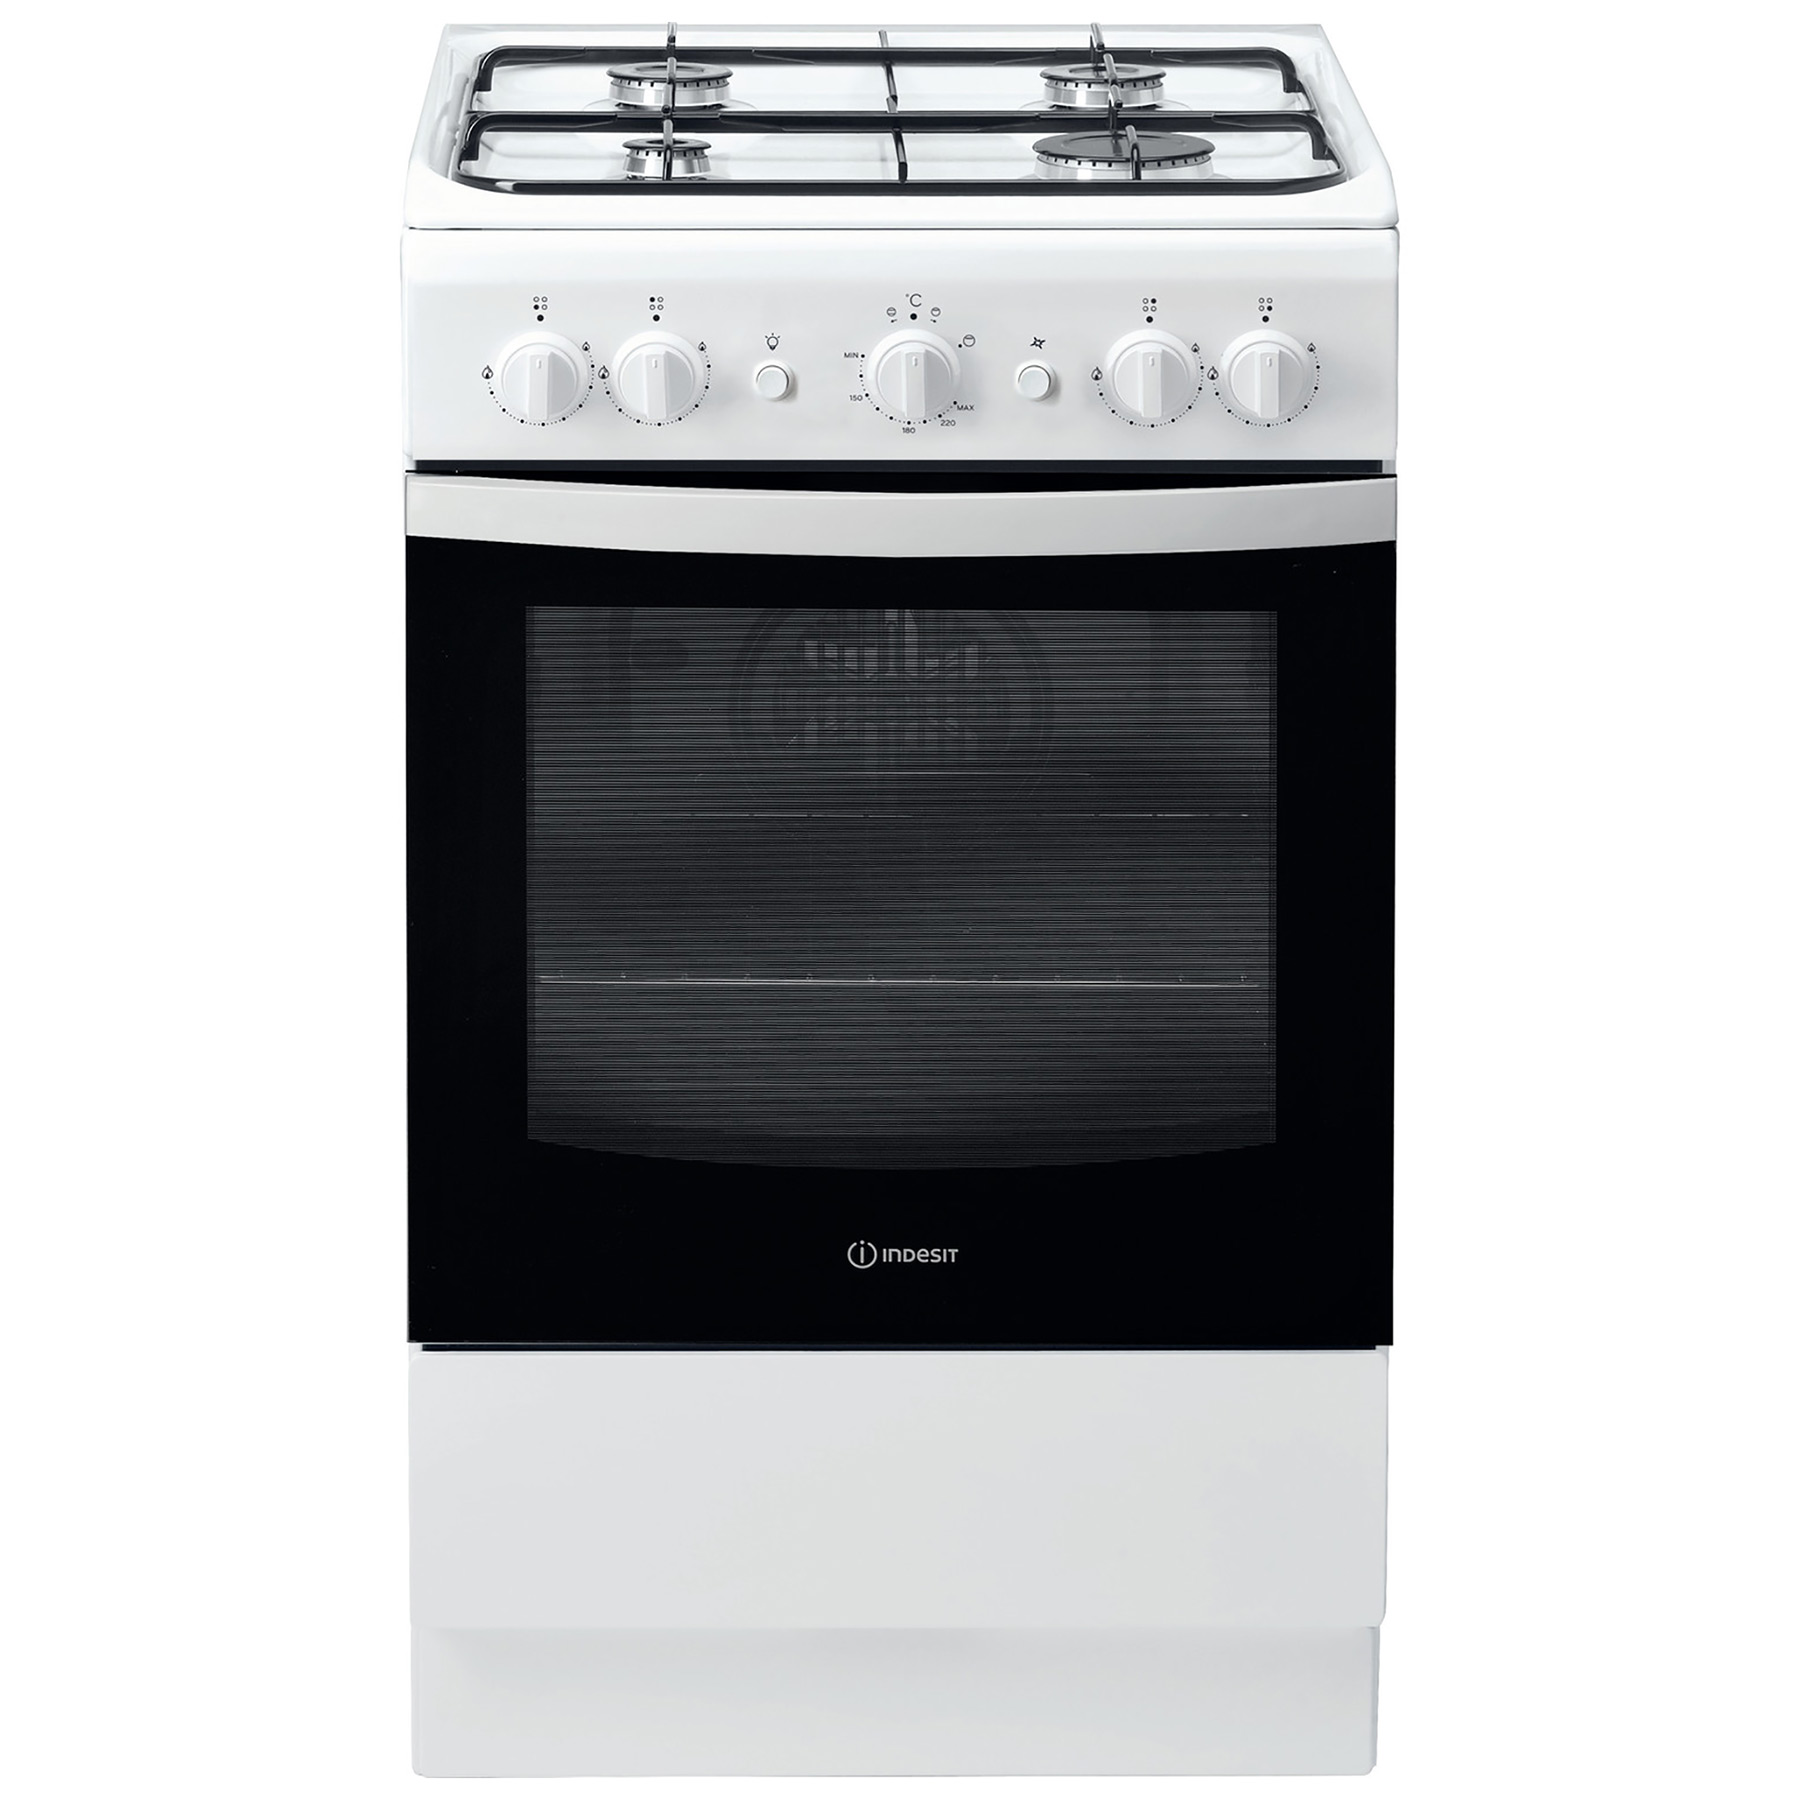 Image of Indesit IS5G1KMW 50cm Single Oven Gas Cooker in White 59 Litres